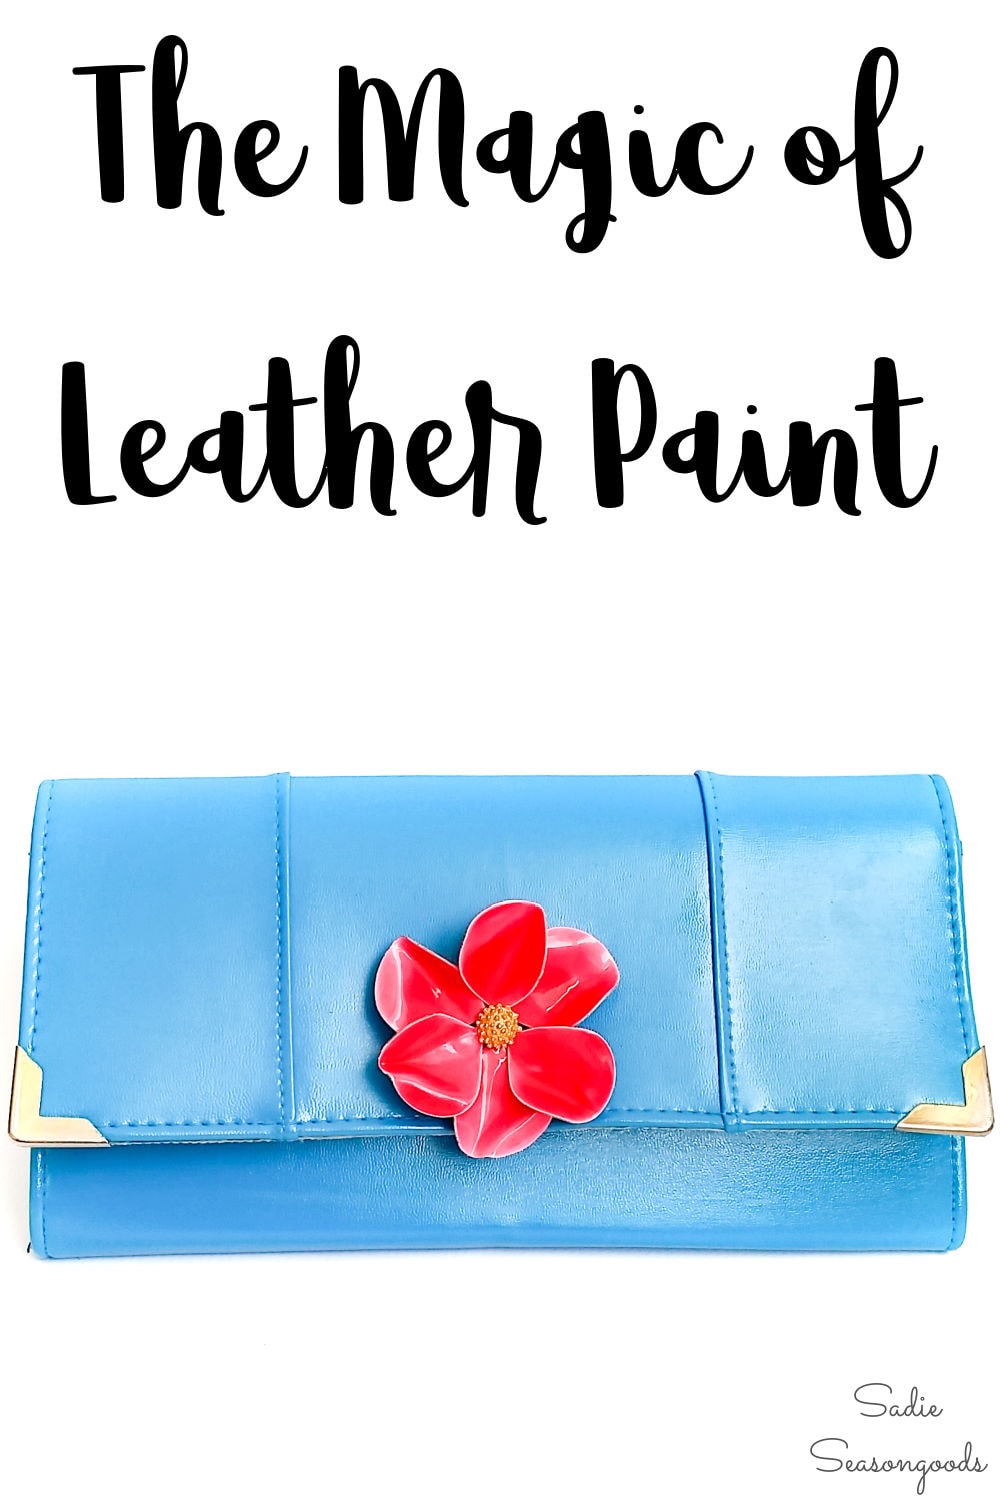 HOW TO PAINT A WALLET: DIY Painted Leather Wallet I Angelus Direct Tutorial  l Hand-Painted 